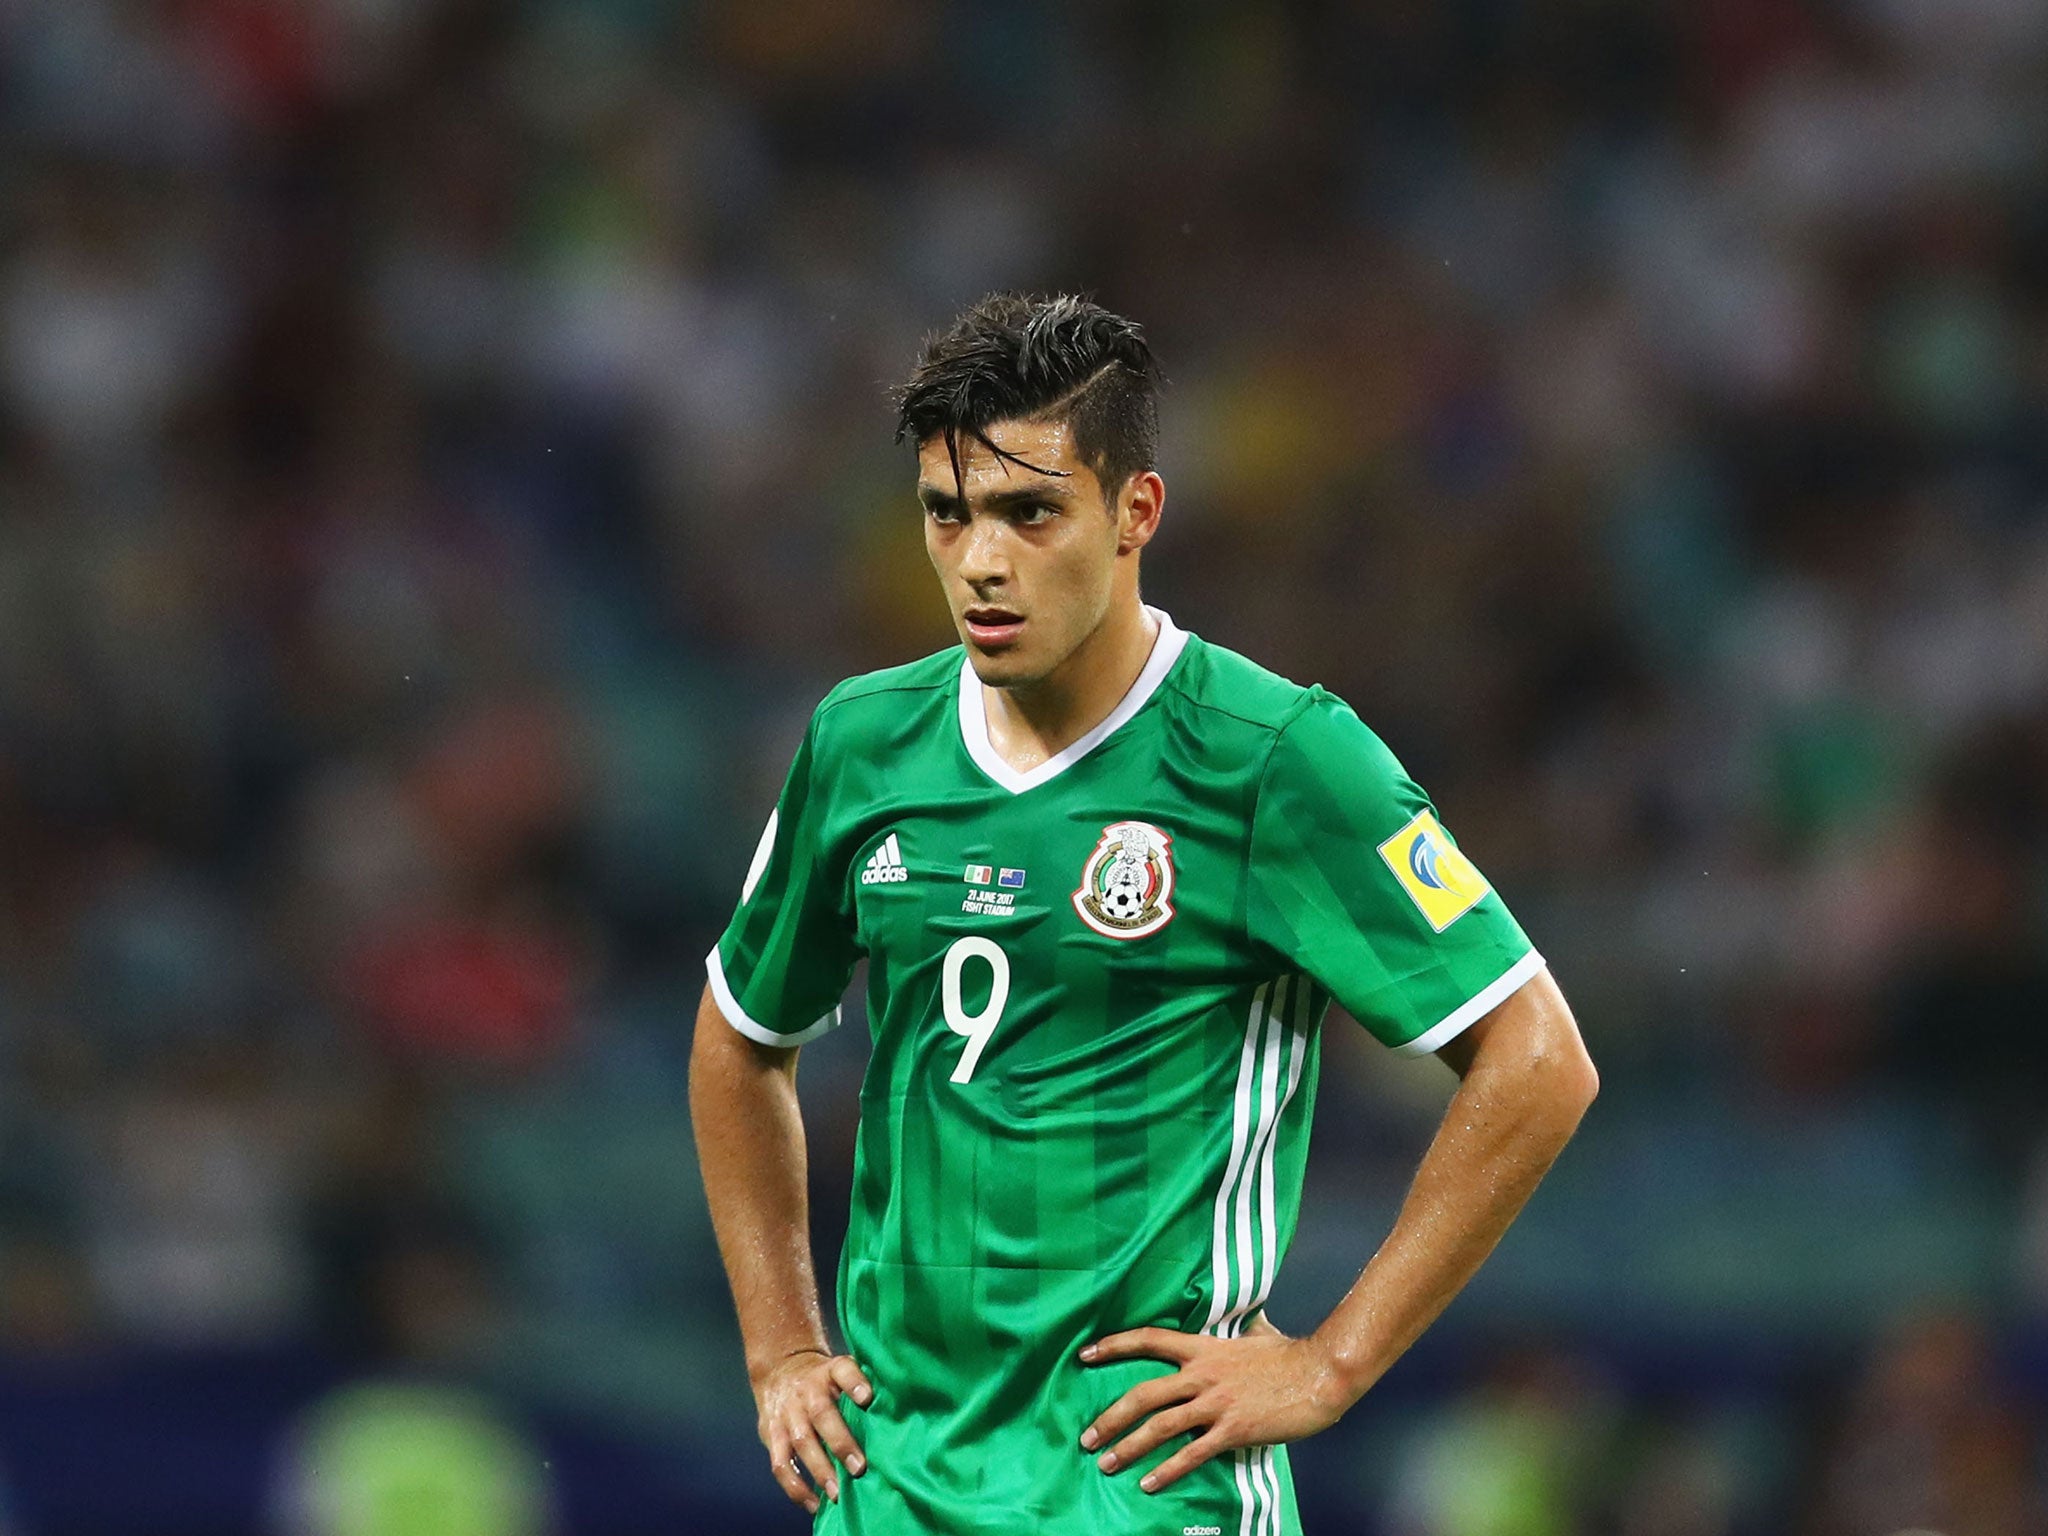 Raul Jimenez represented Mexico at the recent Confederations Cup